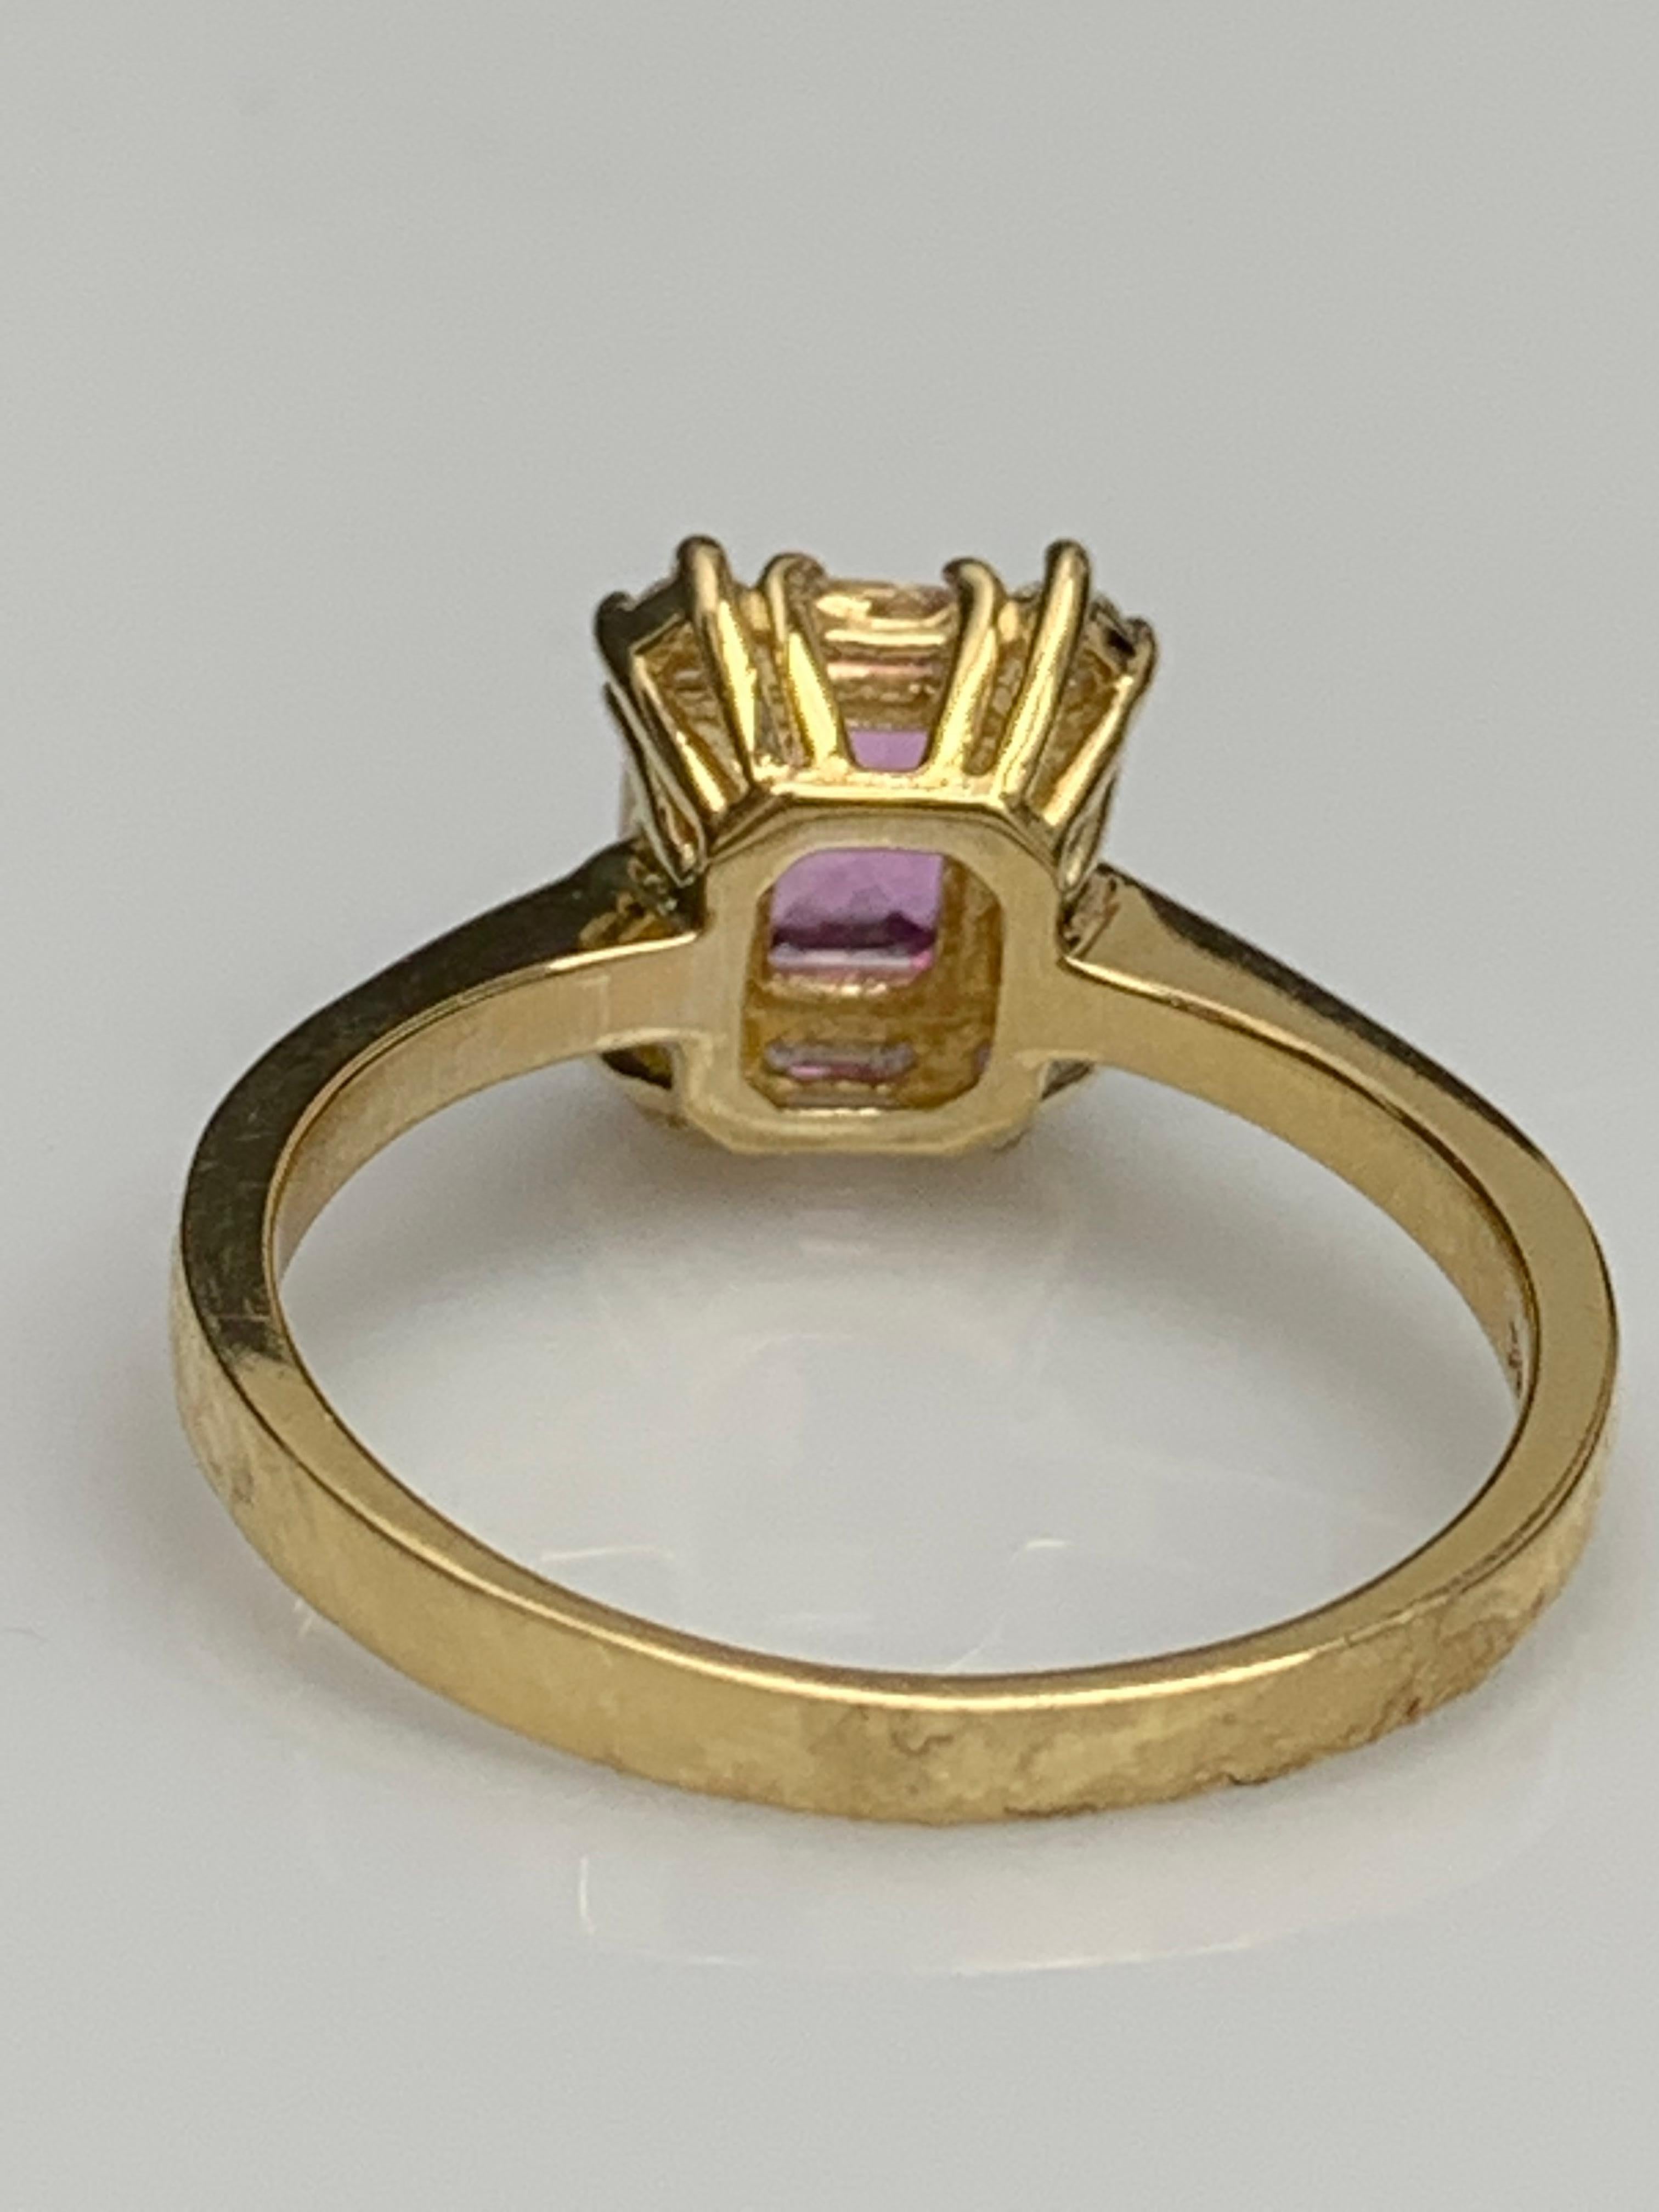 0.55 Carat Emerald Cut Pink Sapphire and Diamond Ring 14K Yellow Gold For Sale 7